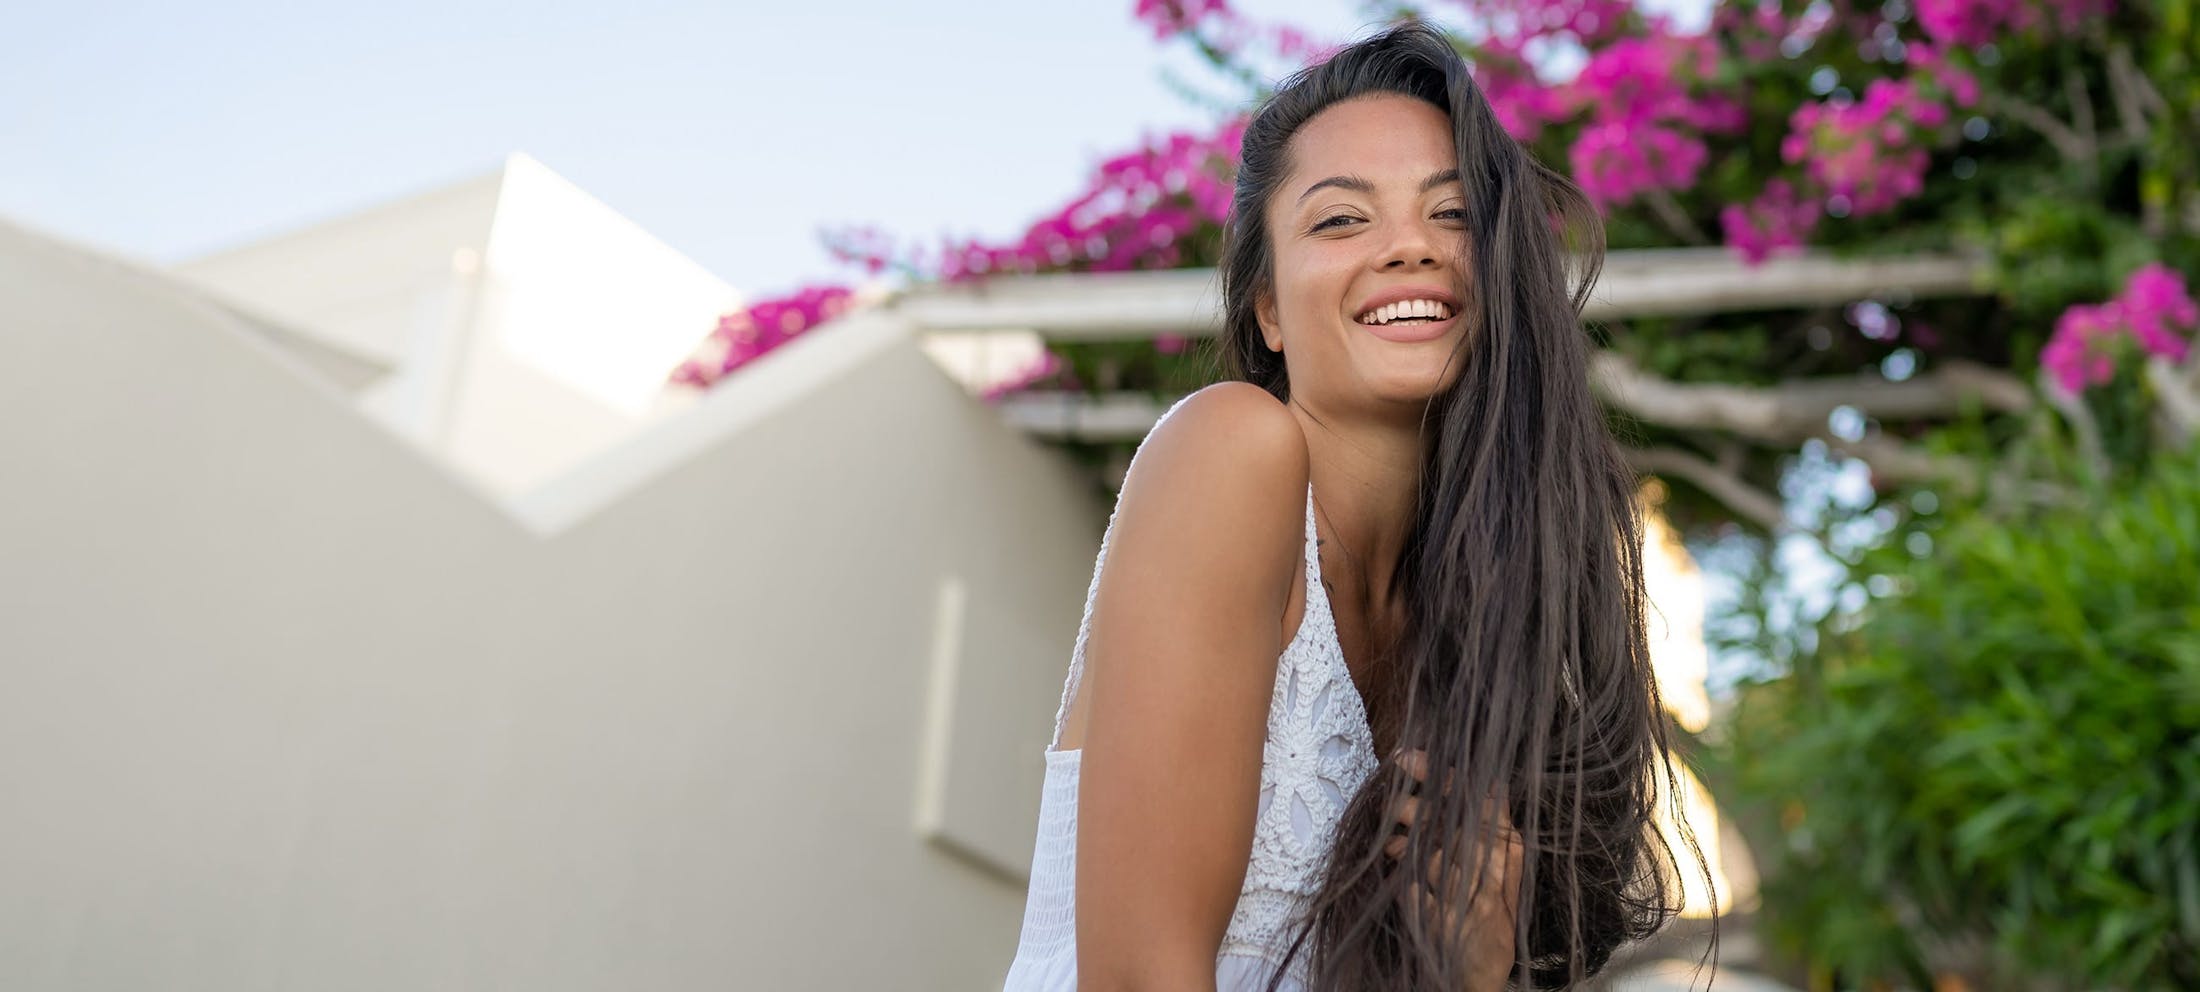 Woman with long dark hair outside smiling